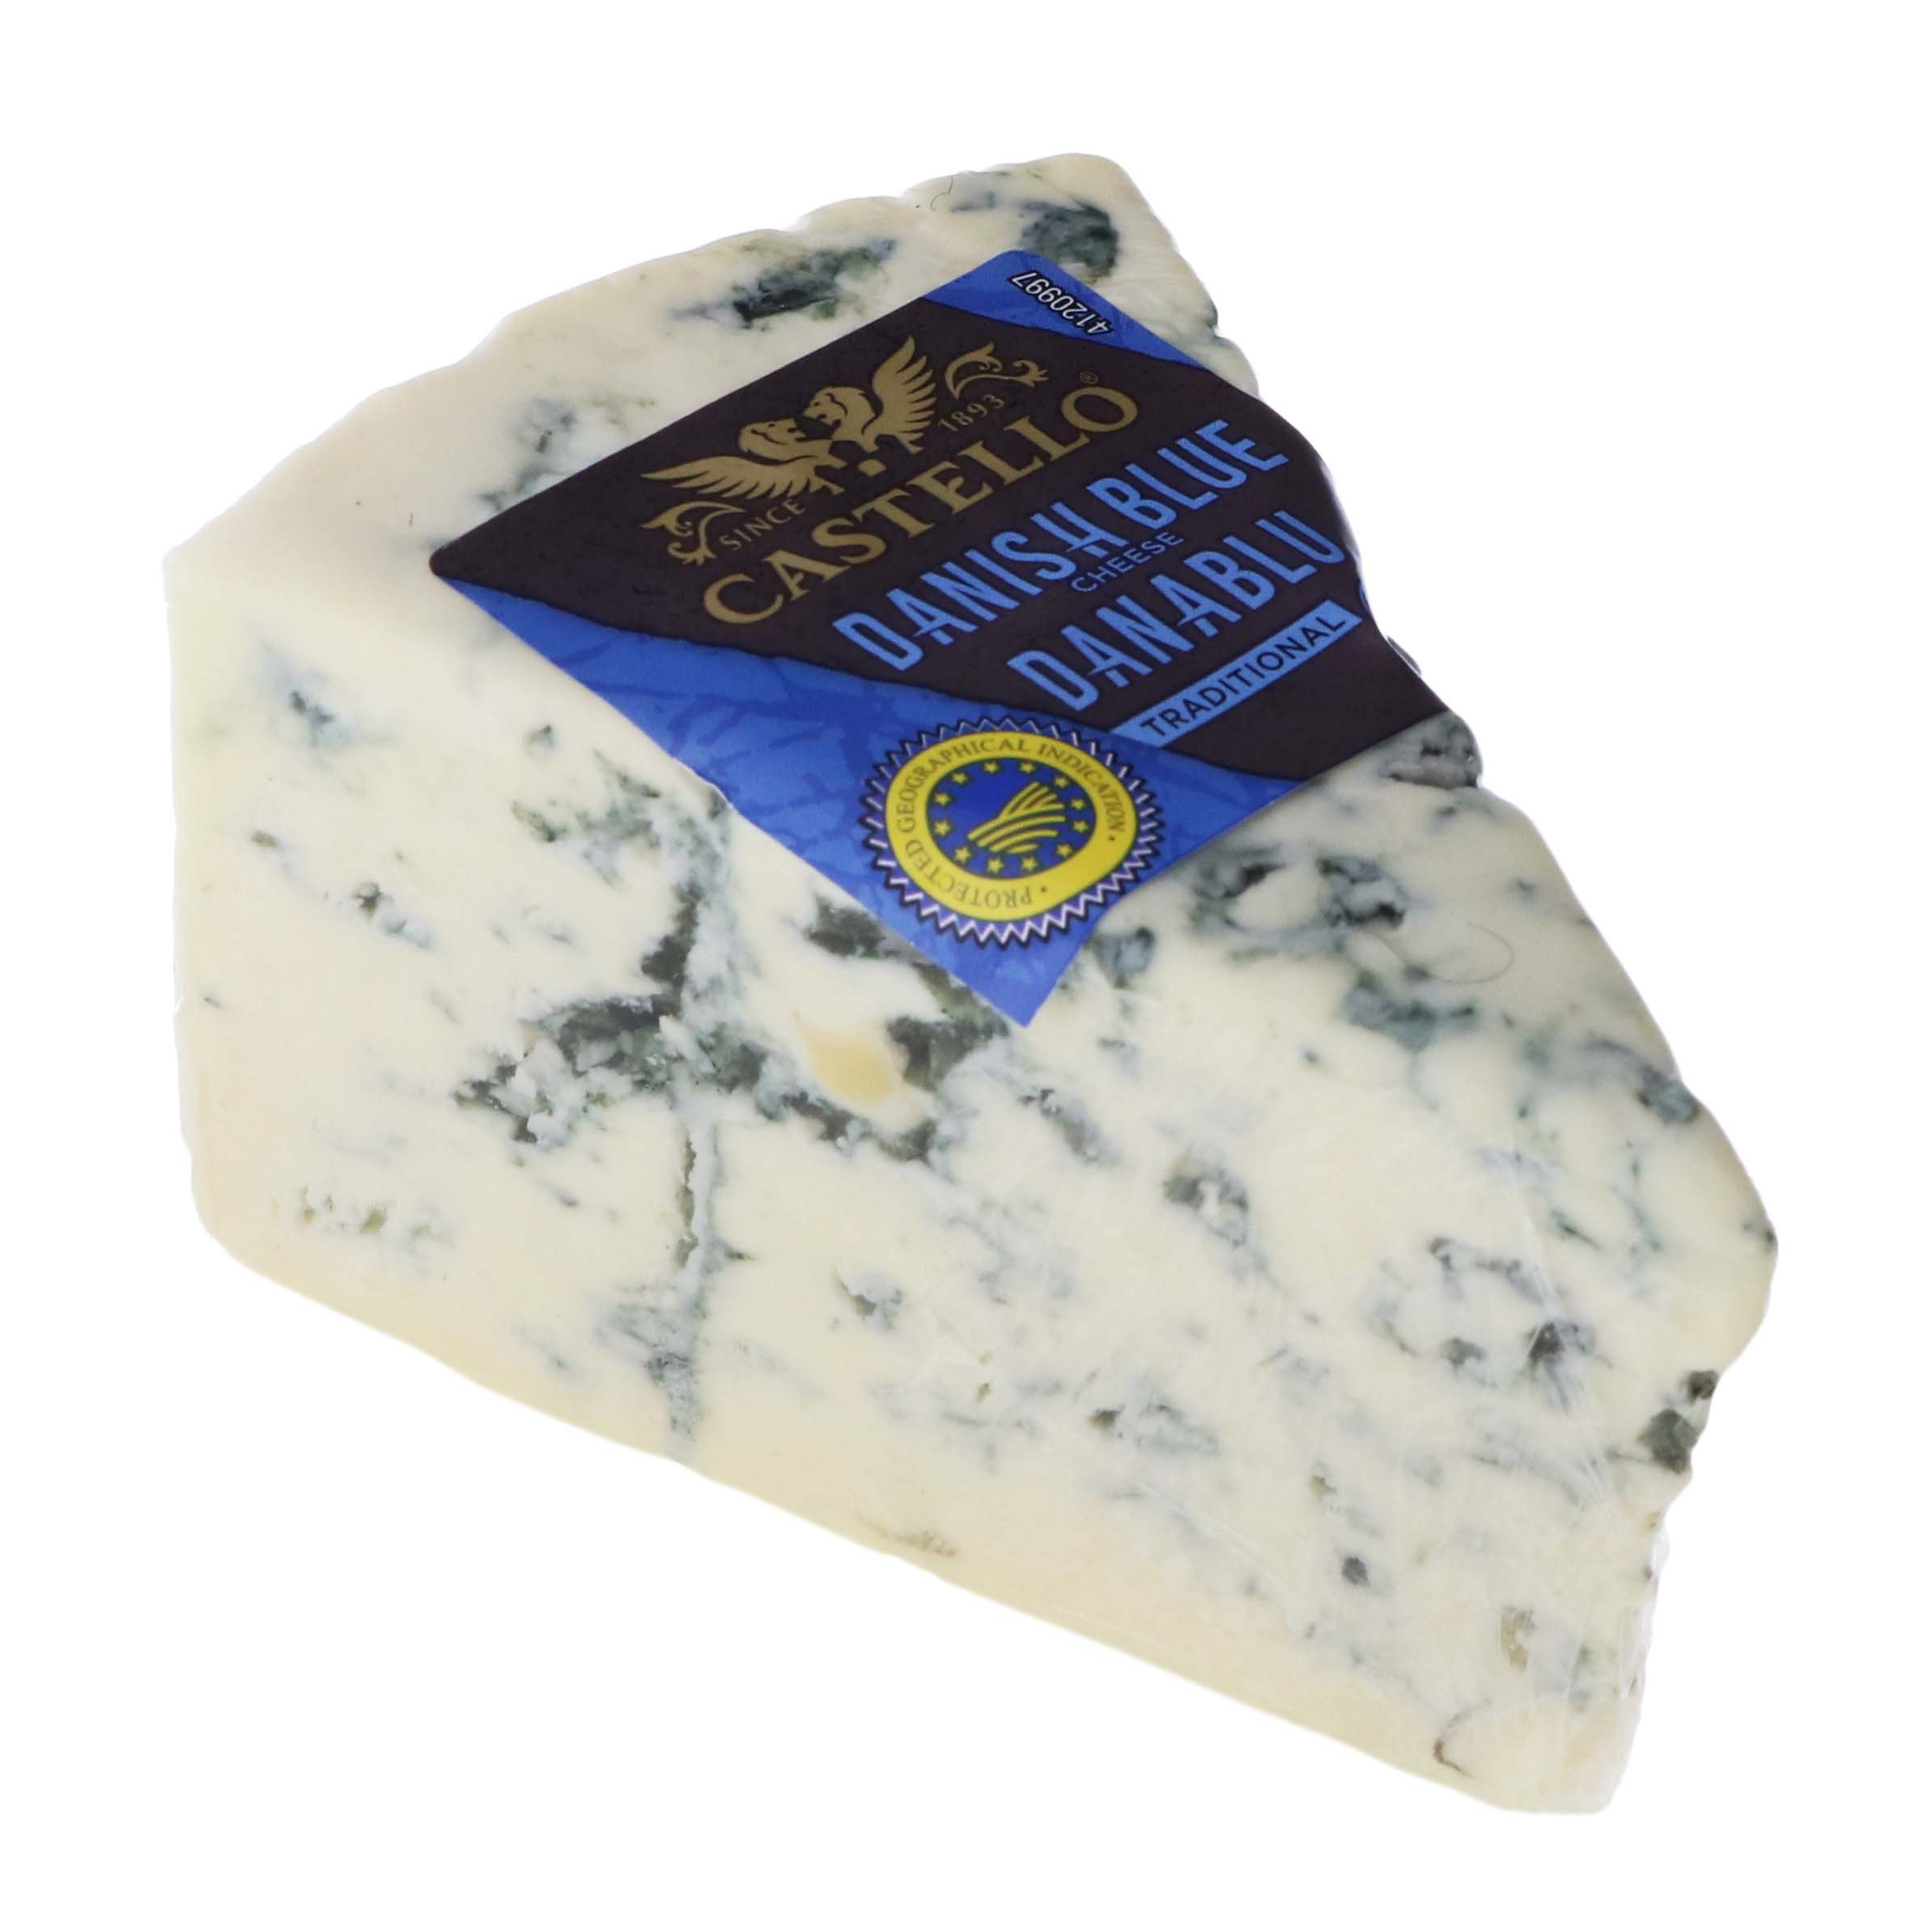 What Is Blue Cheese?